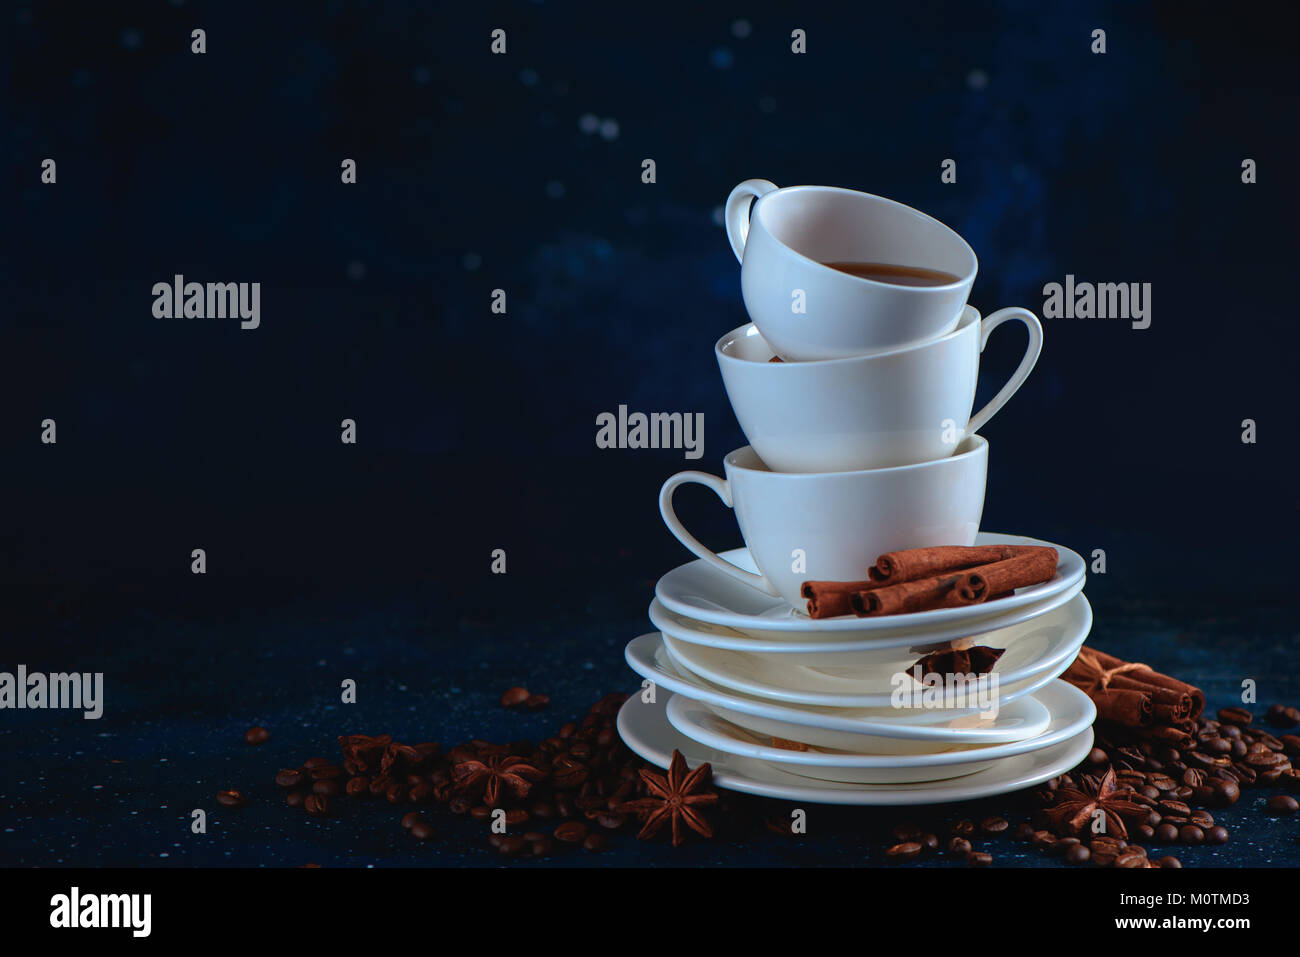 Header with a stack of balancing white coffee cups and tea saucers, coffee beans and cinnamon on a dark blue background. Dark food photography with co Stock Photo